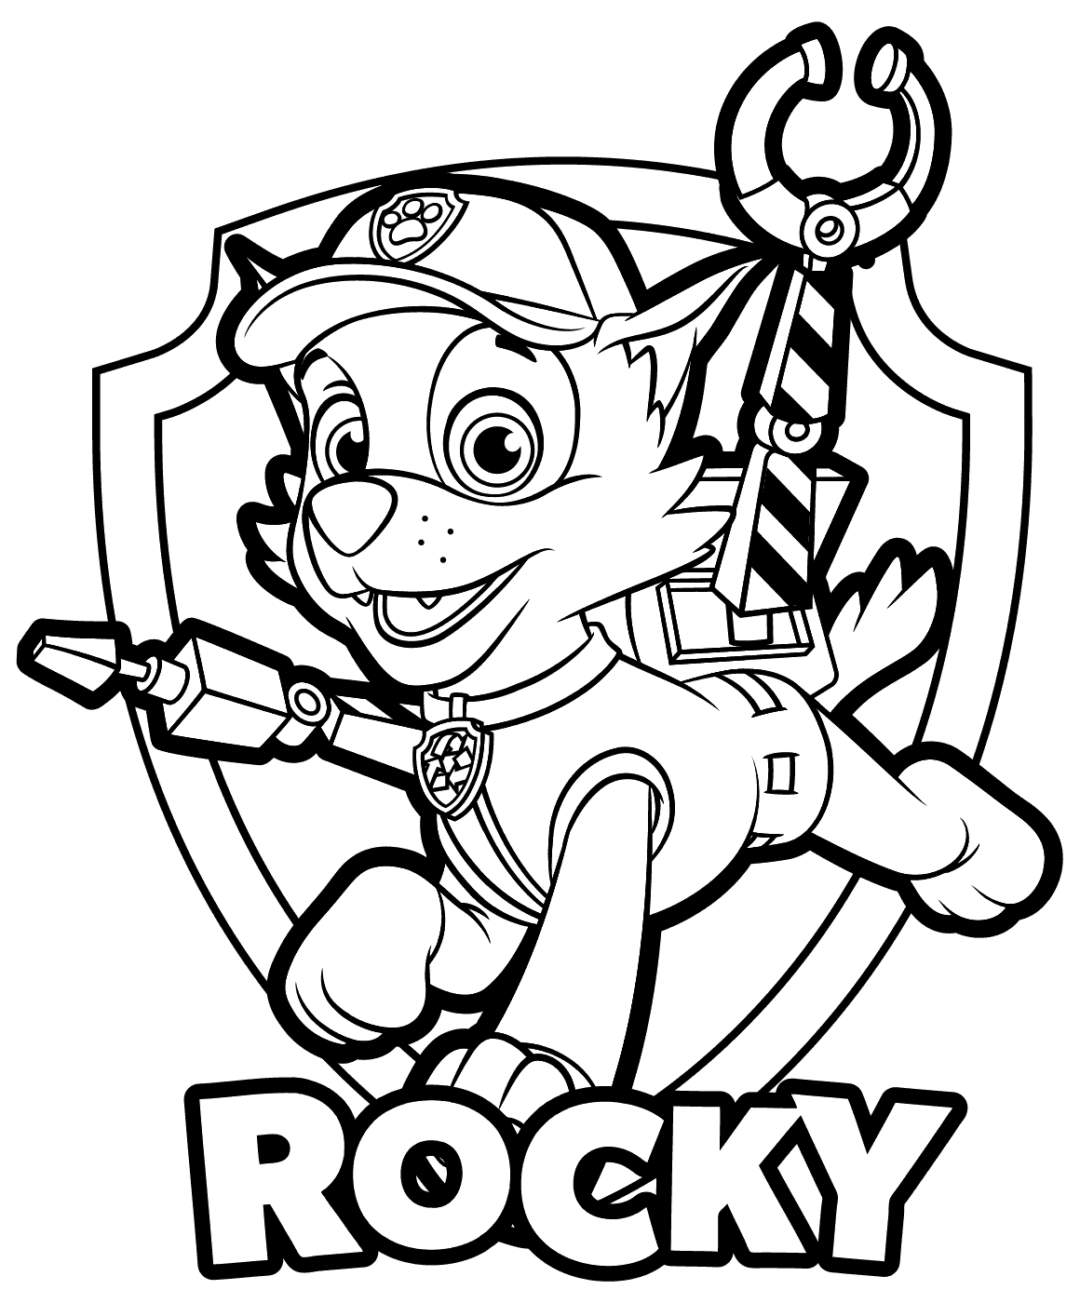 coloring.rocks! | Paw patrol coloring pages, Paw patrol coloring, Paw  patrol rocky